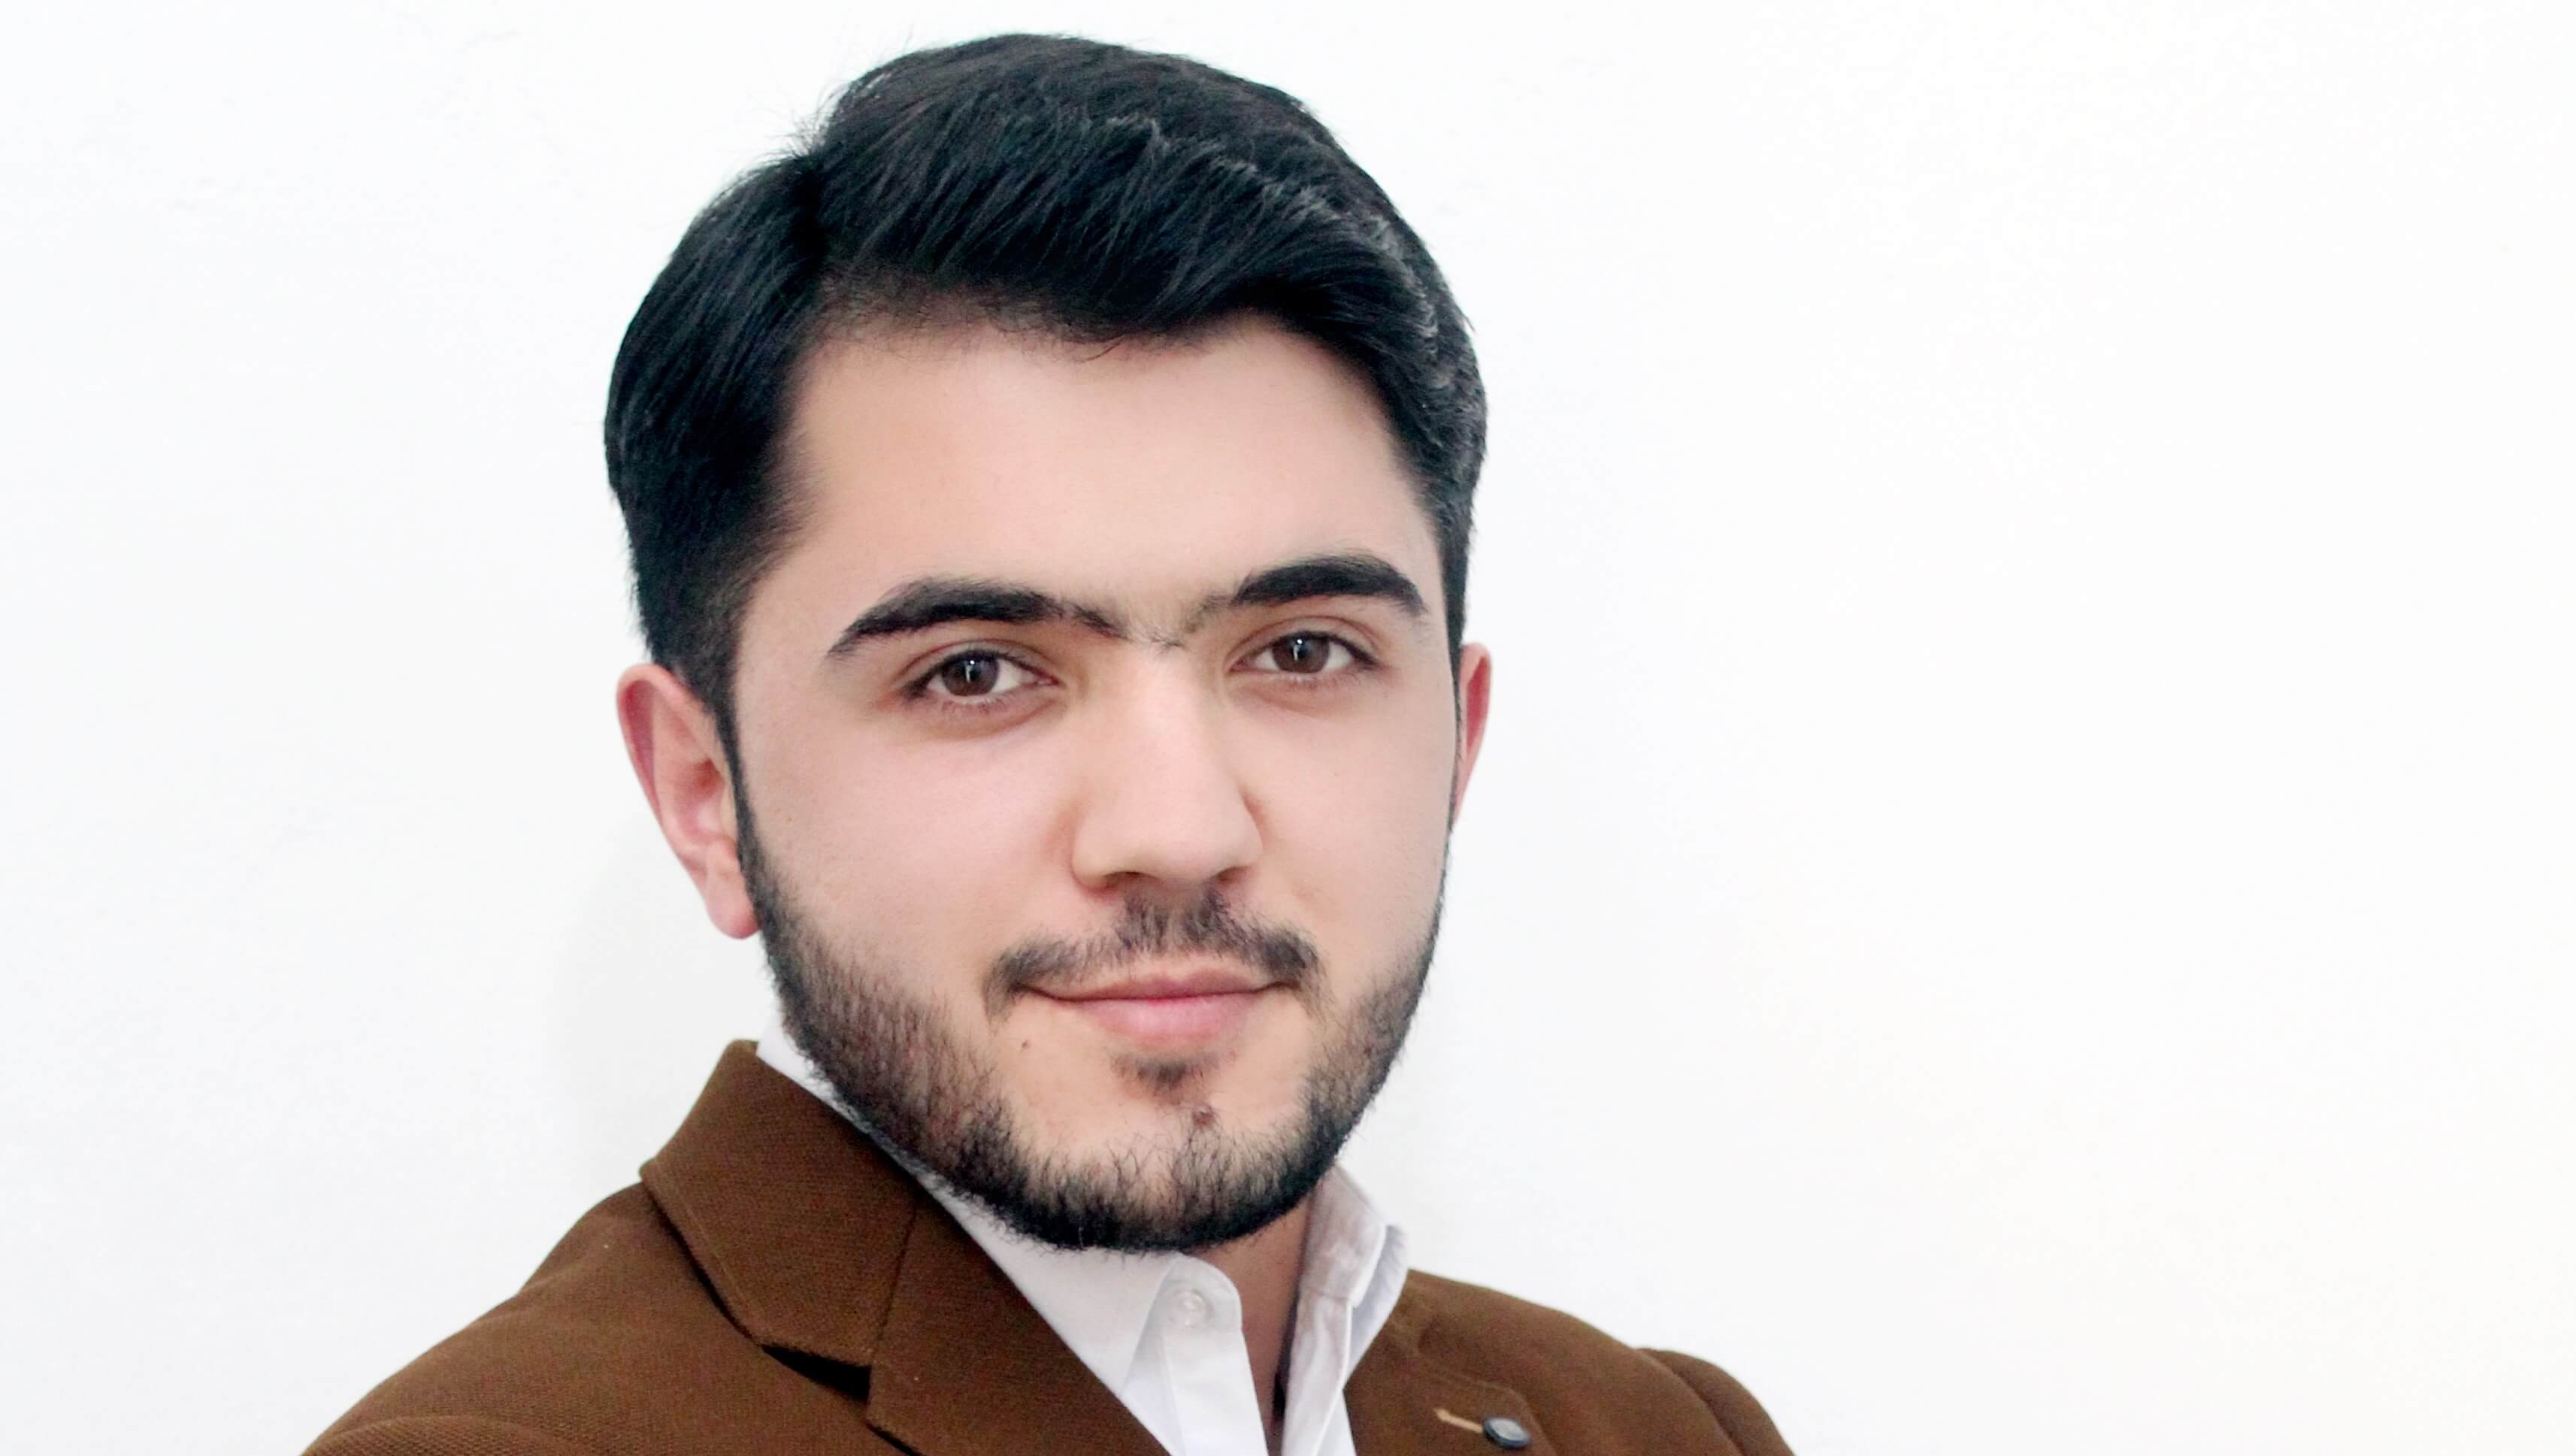 MBA and MPA, in China and Kazakhstan: An Afghan scholar's unconventional master's journey